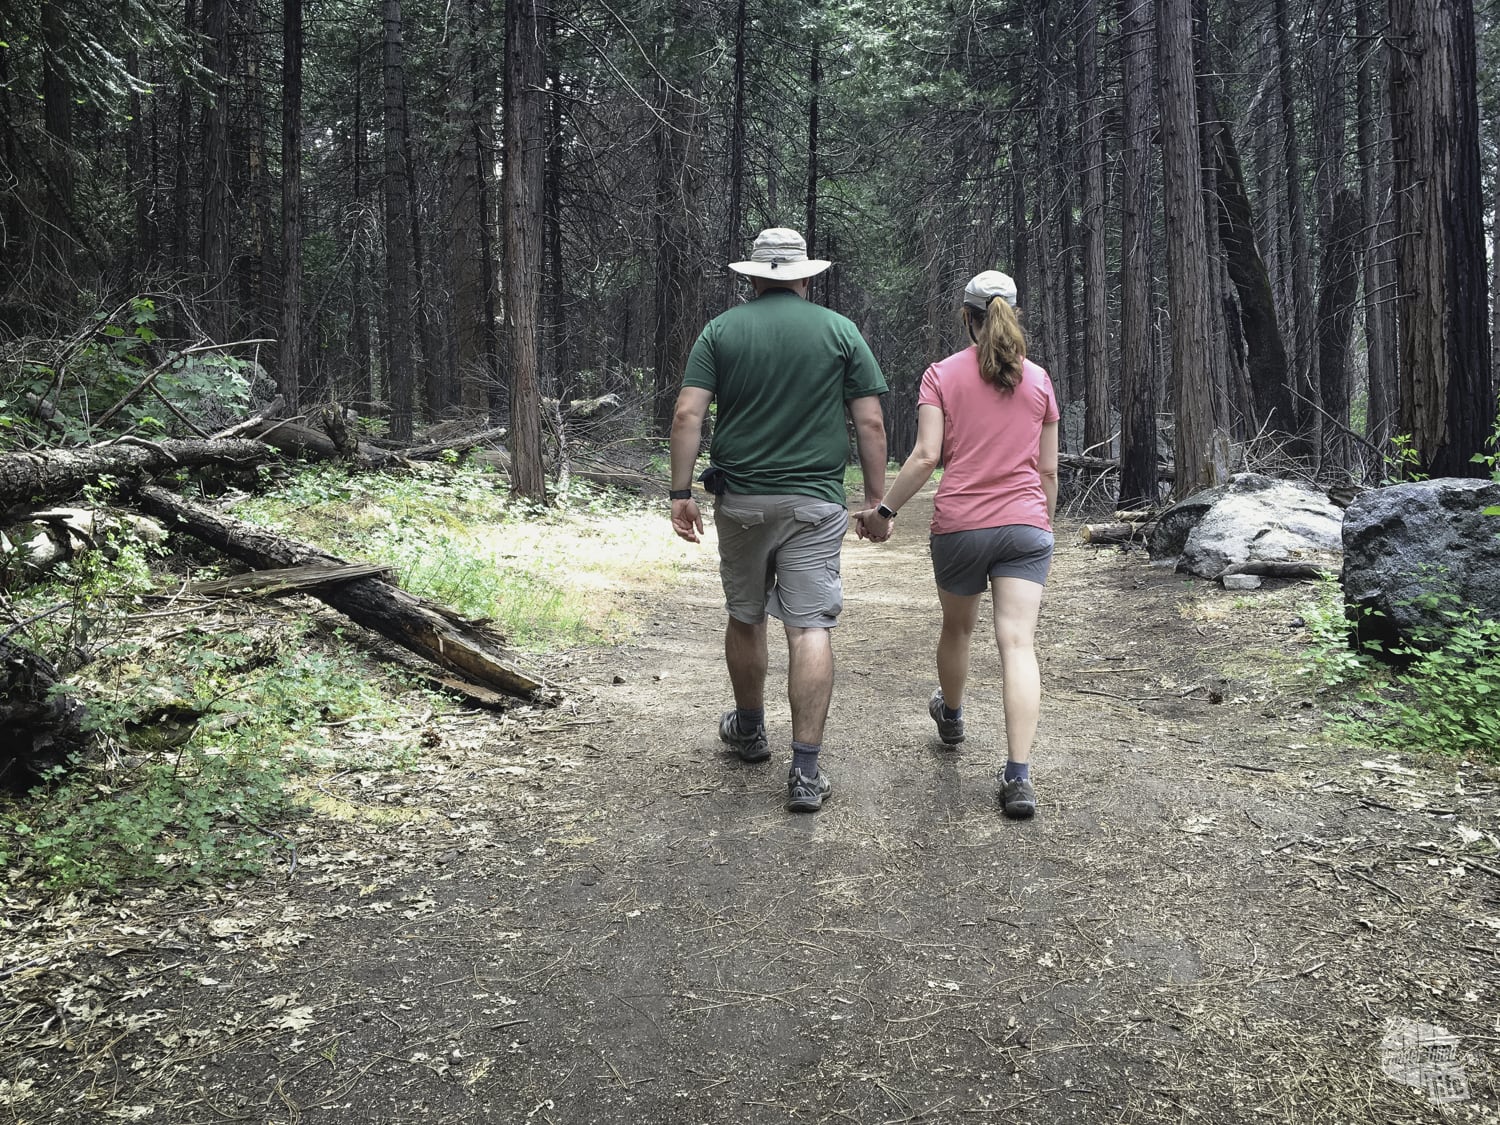 Long, but easy hikes are our favorite following the heart attack!